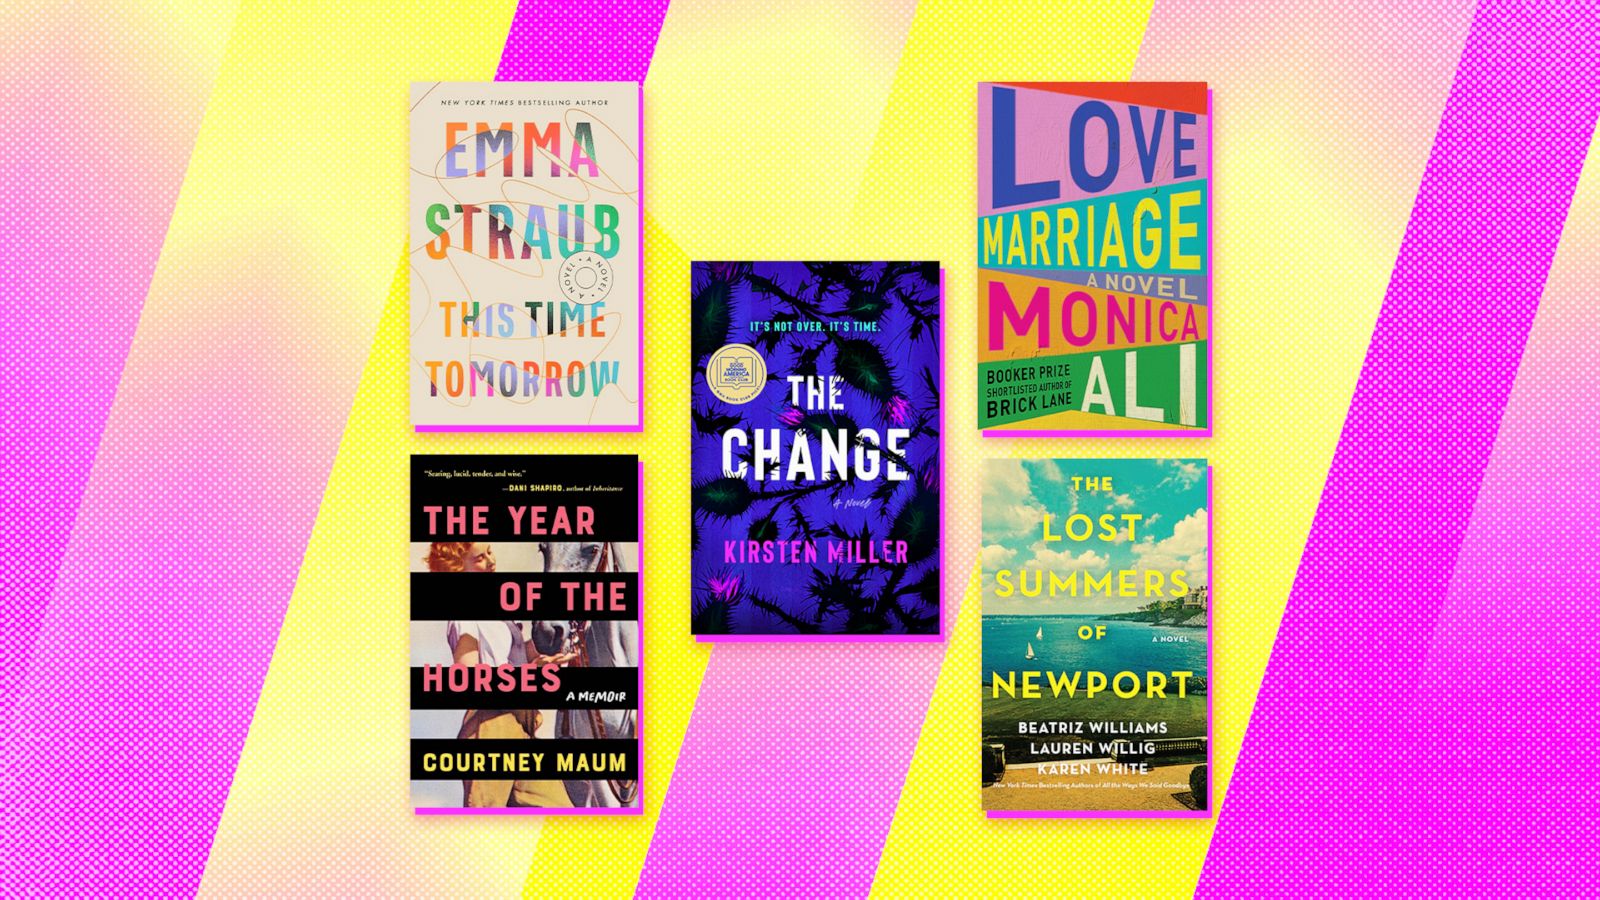 15 new reads to add to your reading list this month